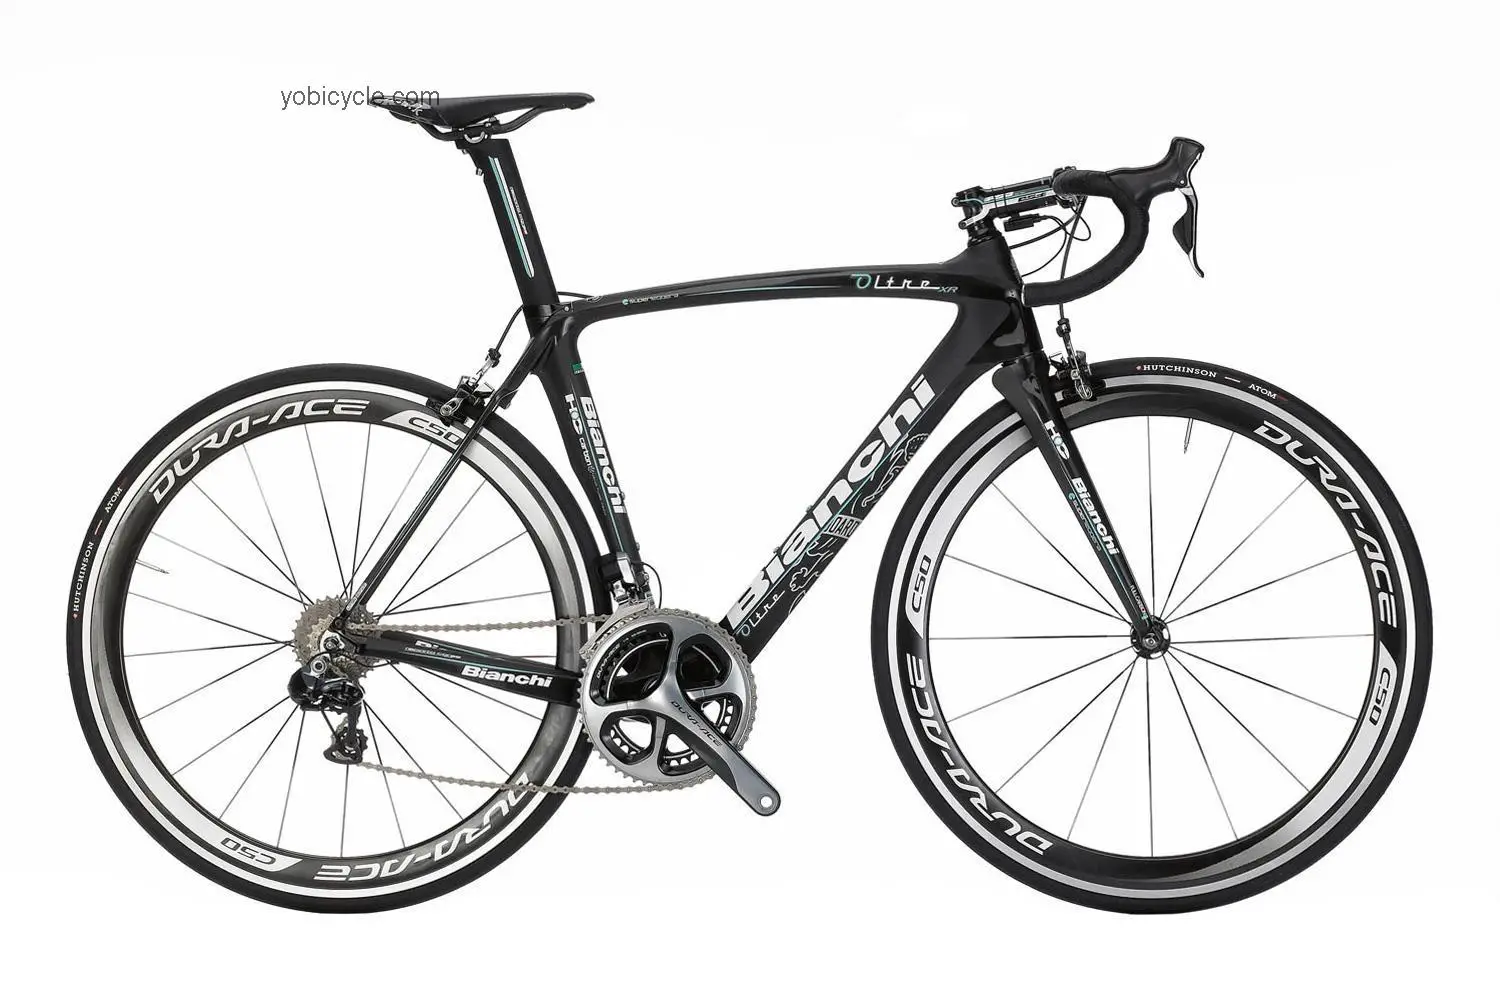 Bianchi  Oltre XR Dura Ace Di2 Technical data and specifications